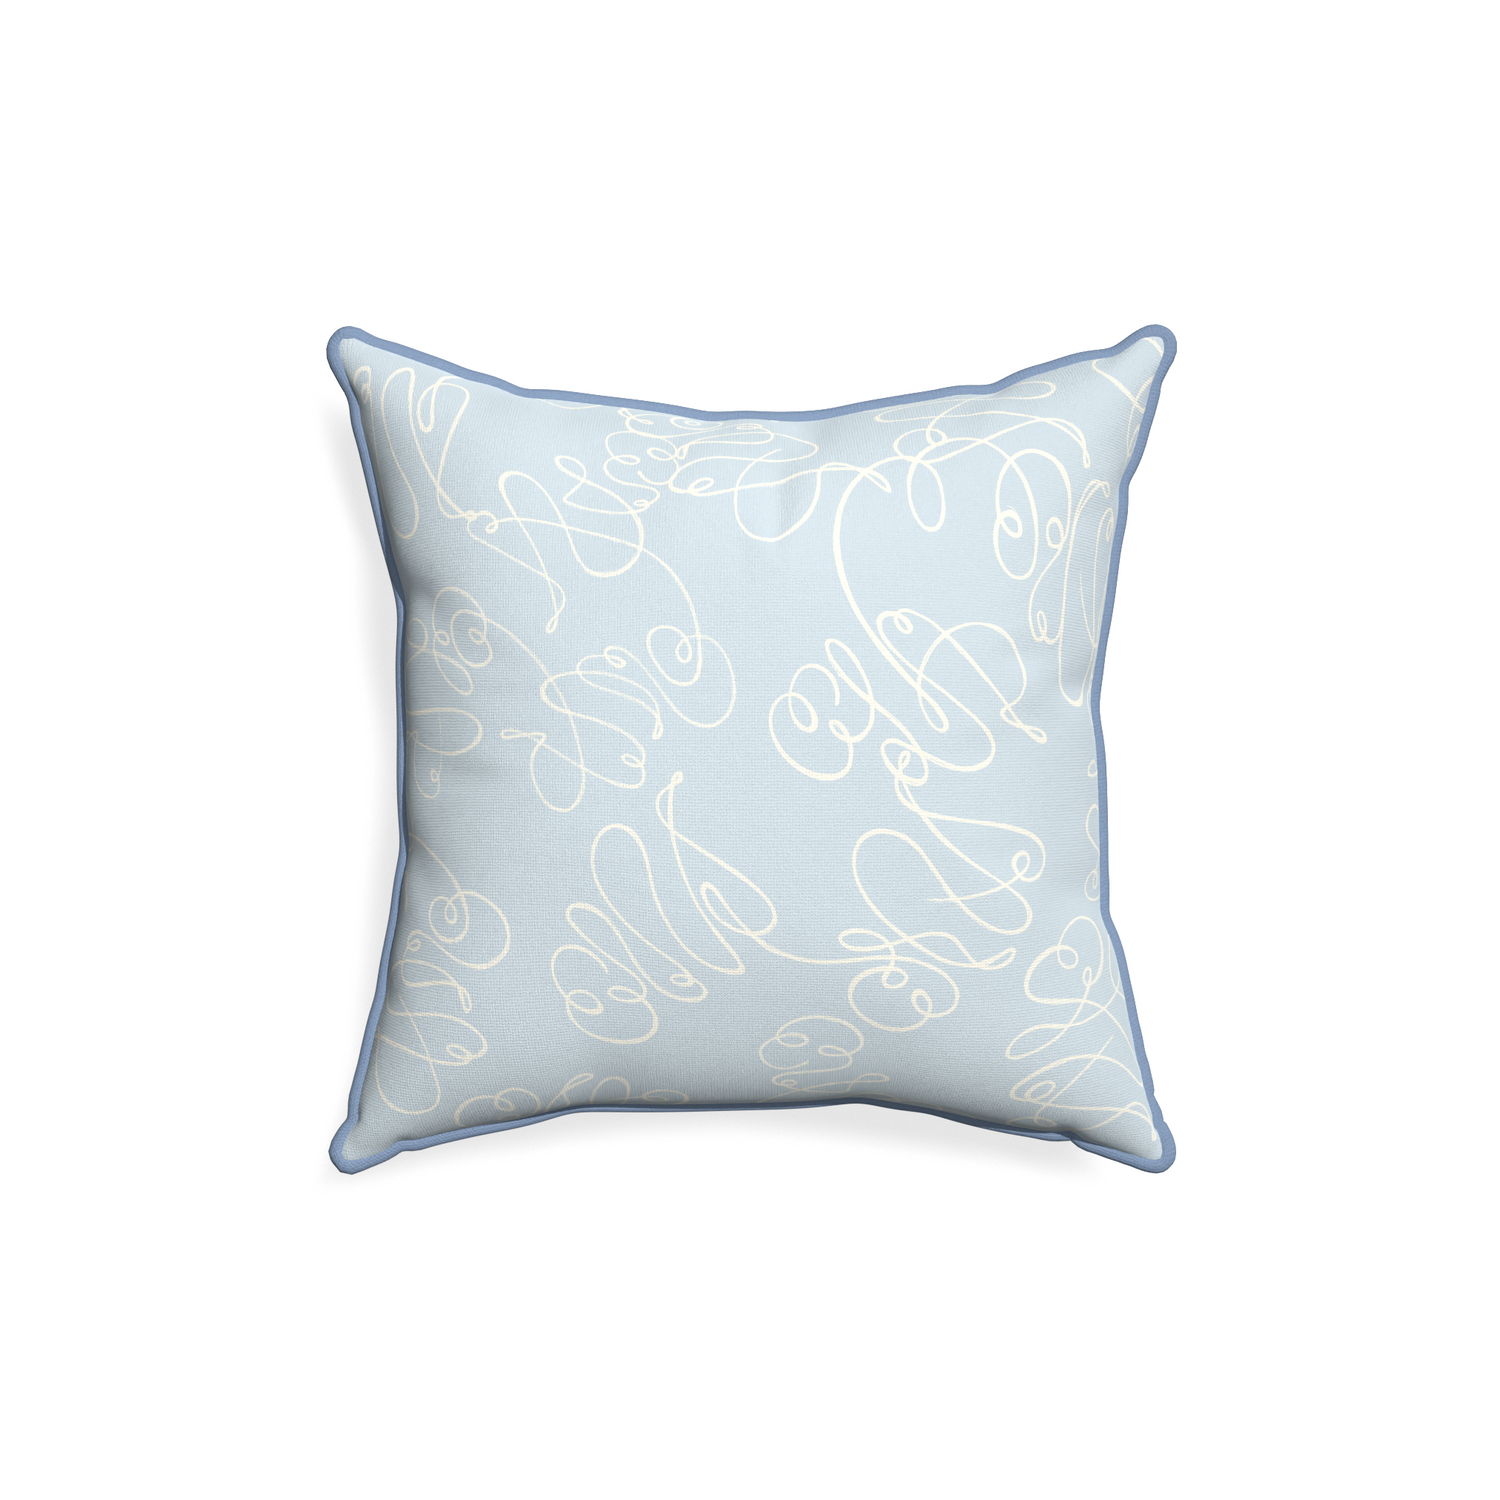 18-square mirabella custom pillow with sky piping on white background